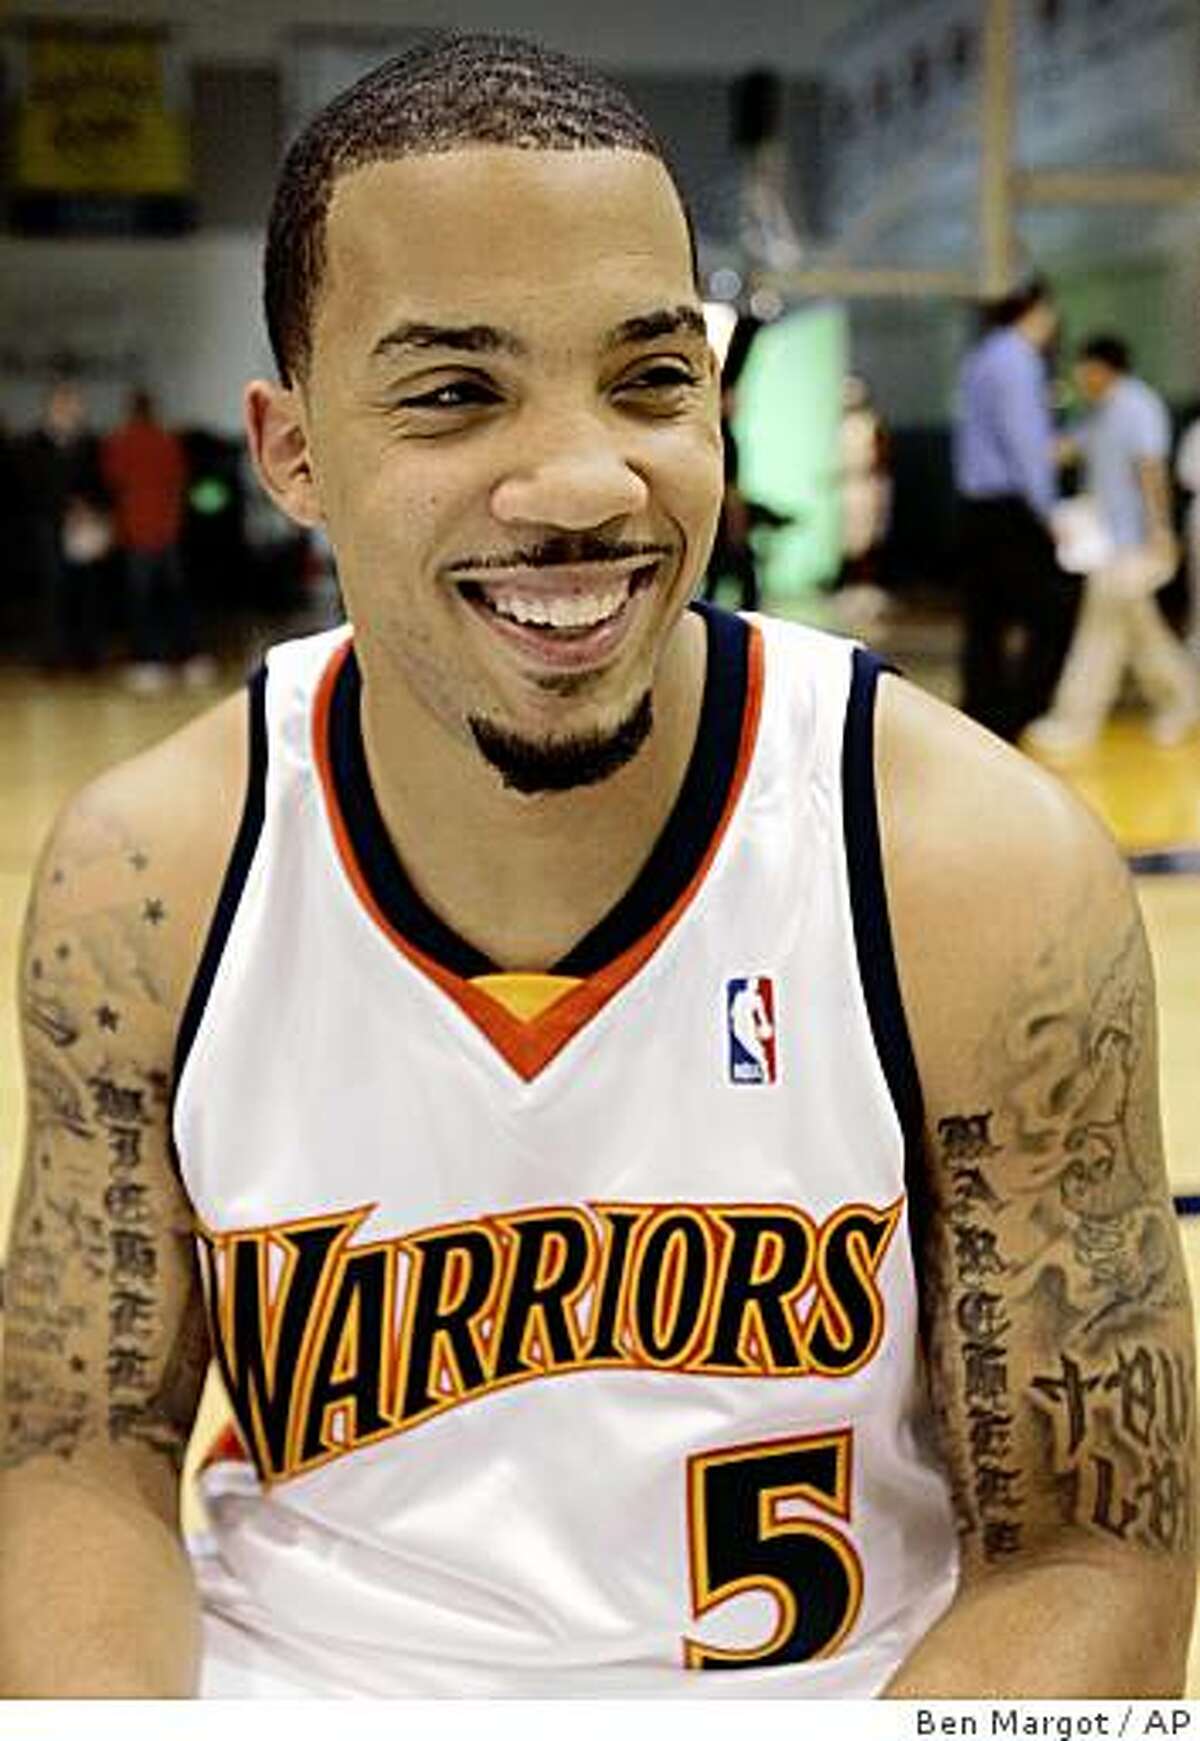 Golden State Warriors' Marcus Williams smiles during an interview at basketball media day Friday, Sept, 26, 2008, in Oakland, Calif.